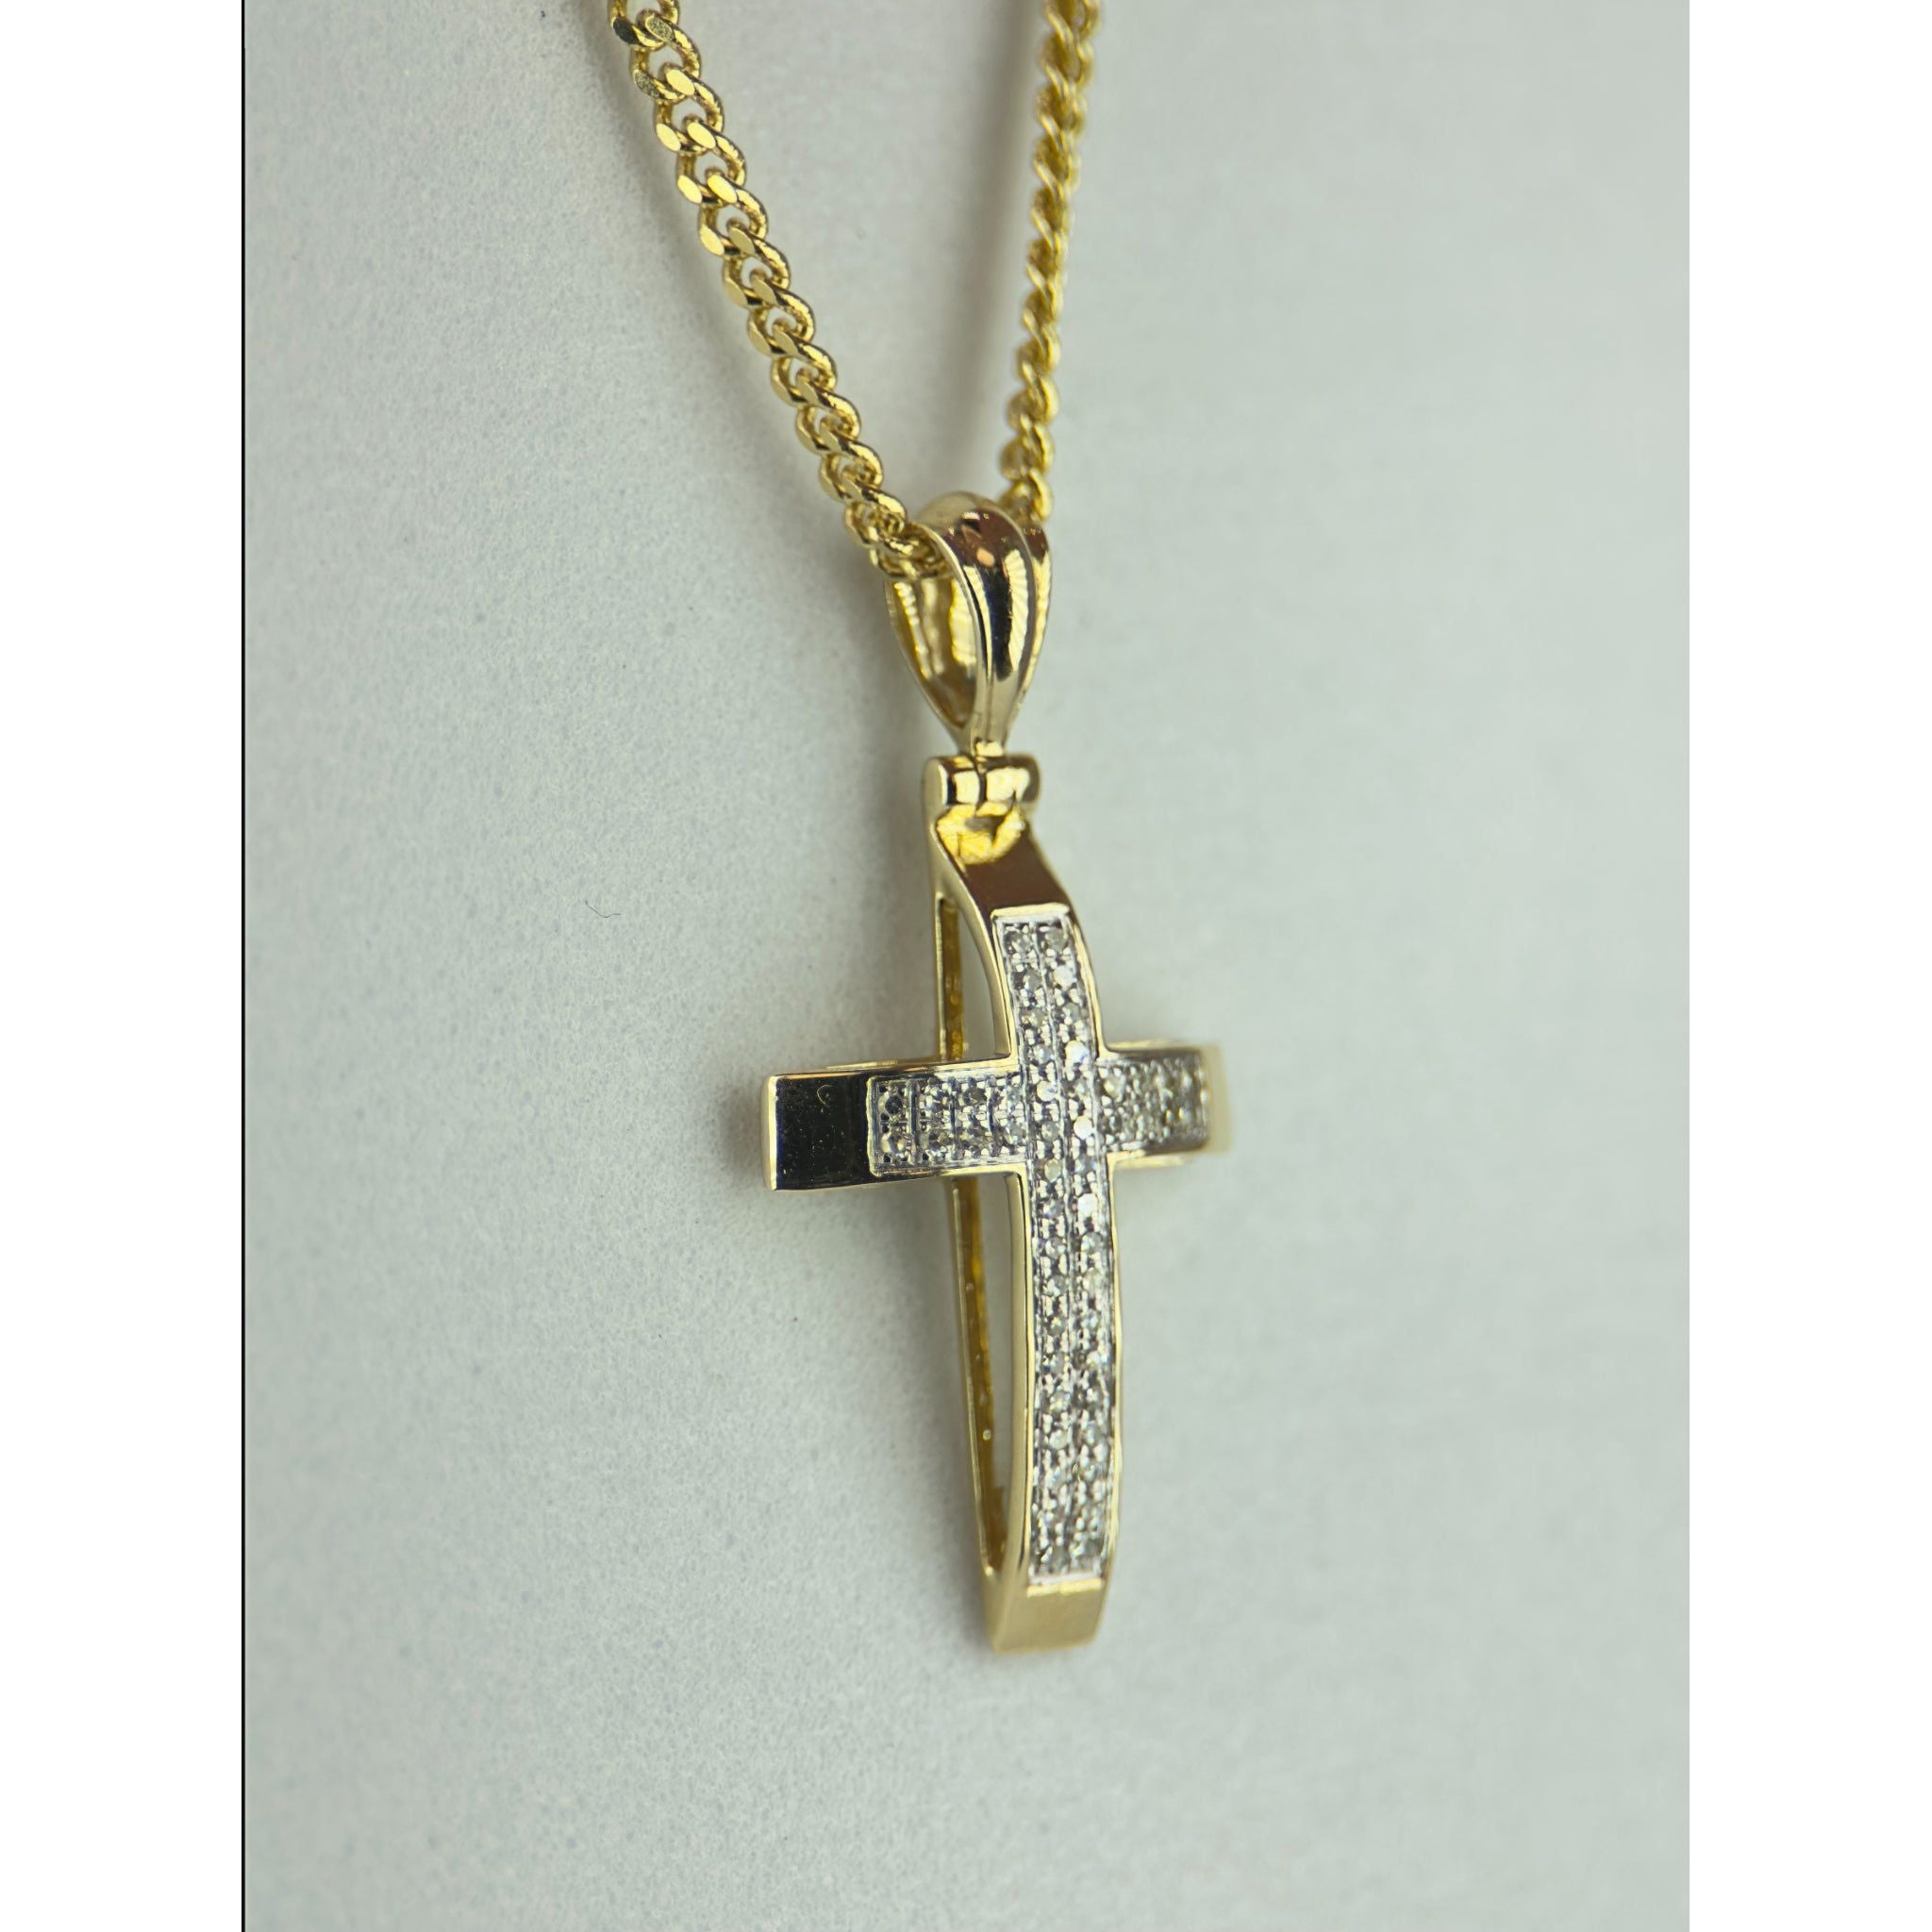 DR2212 - 14K Yellow Gold - Diamond - Pendant and Chain